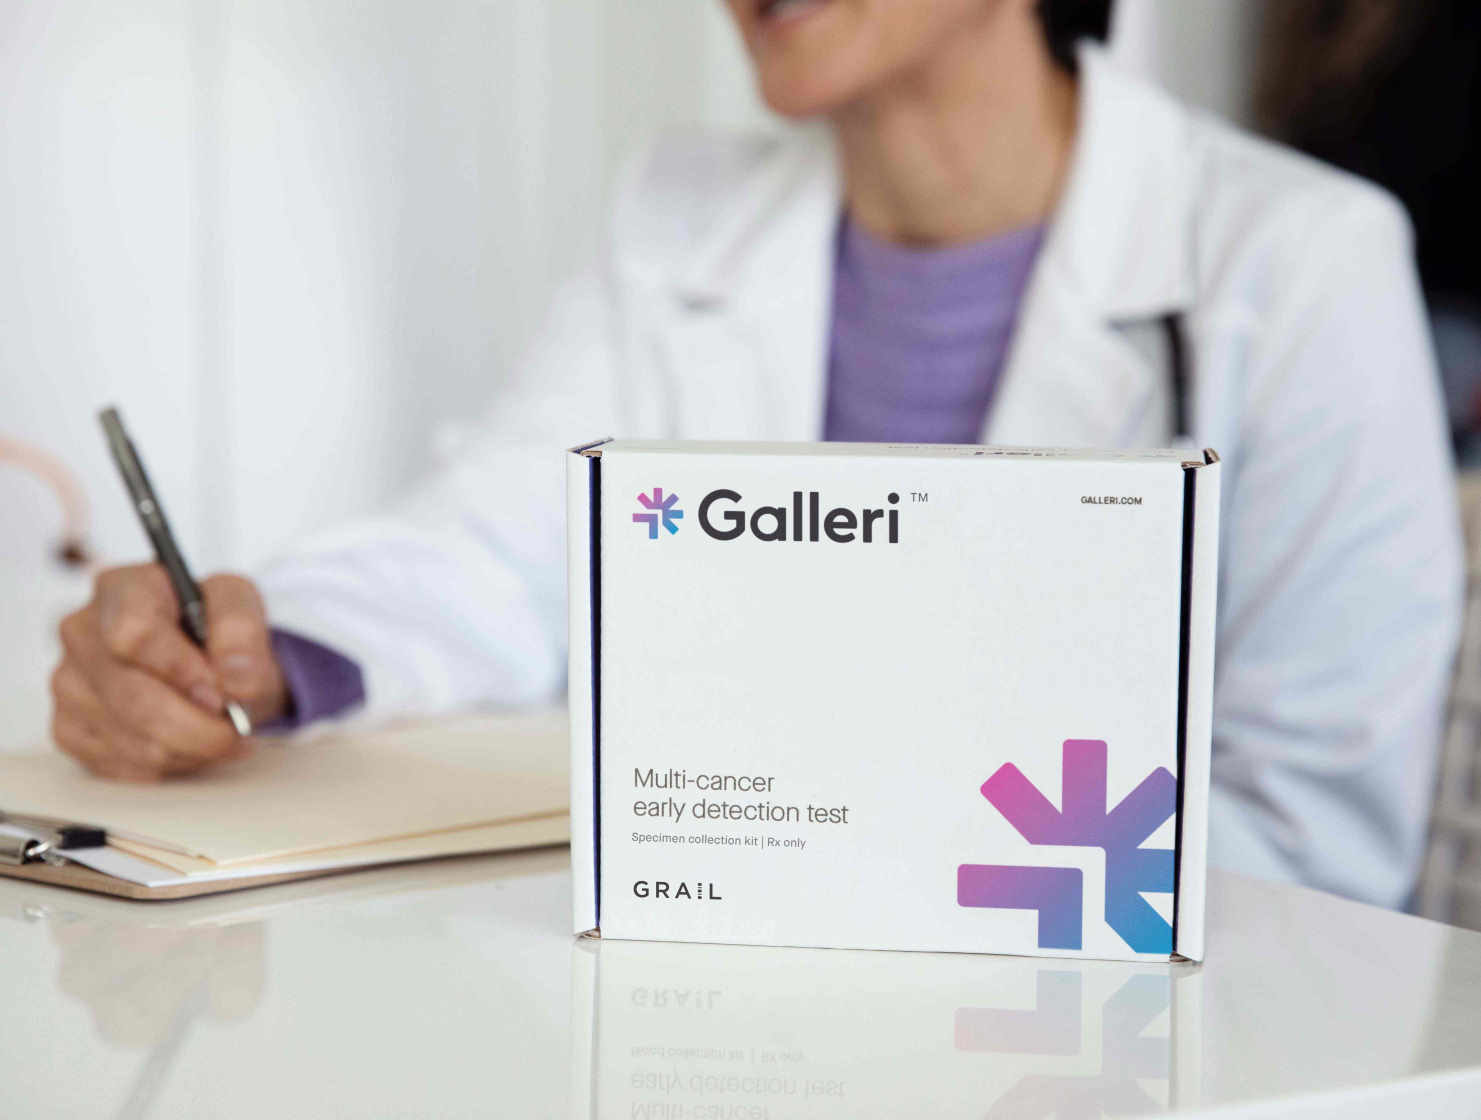 Galleri - Grail's early multi-cancer detection test